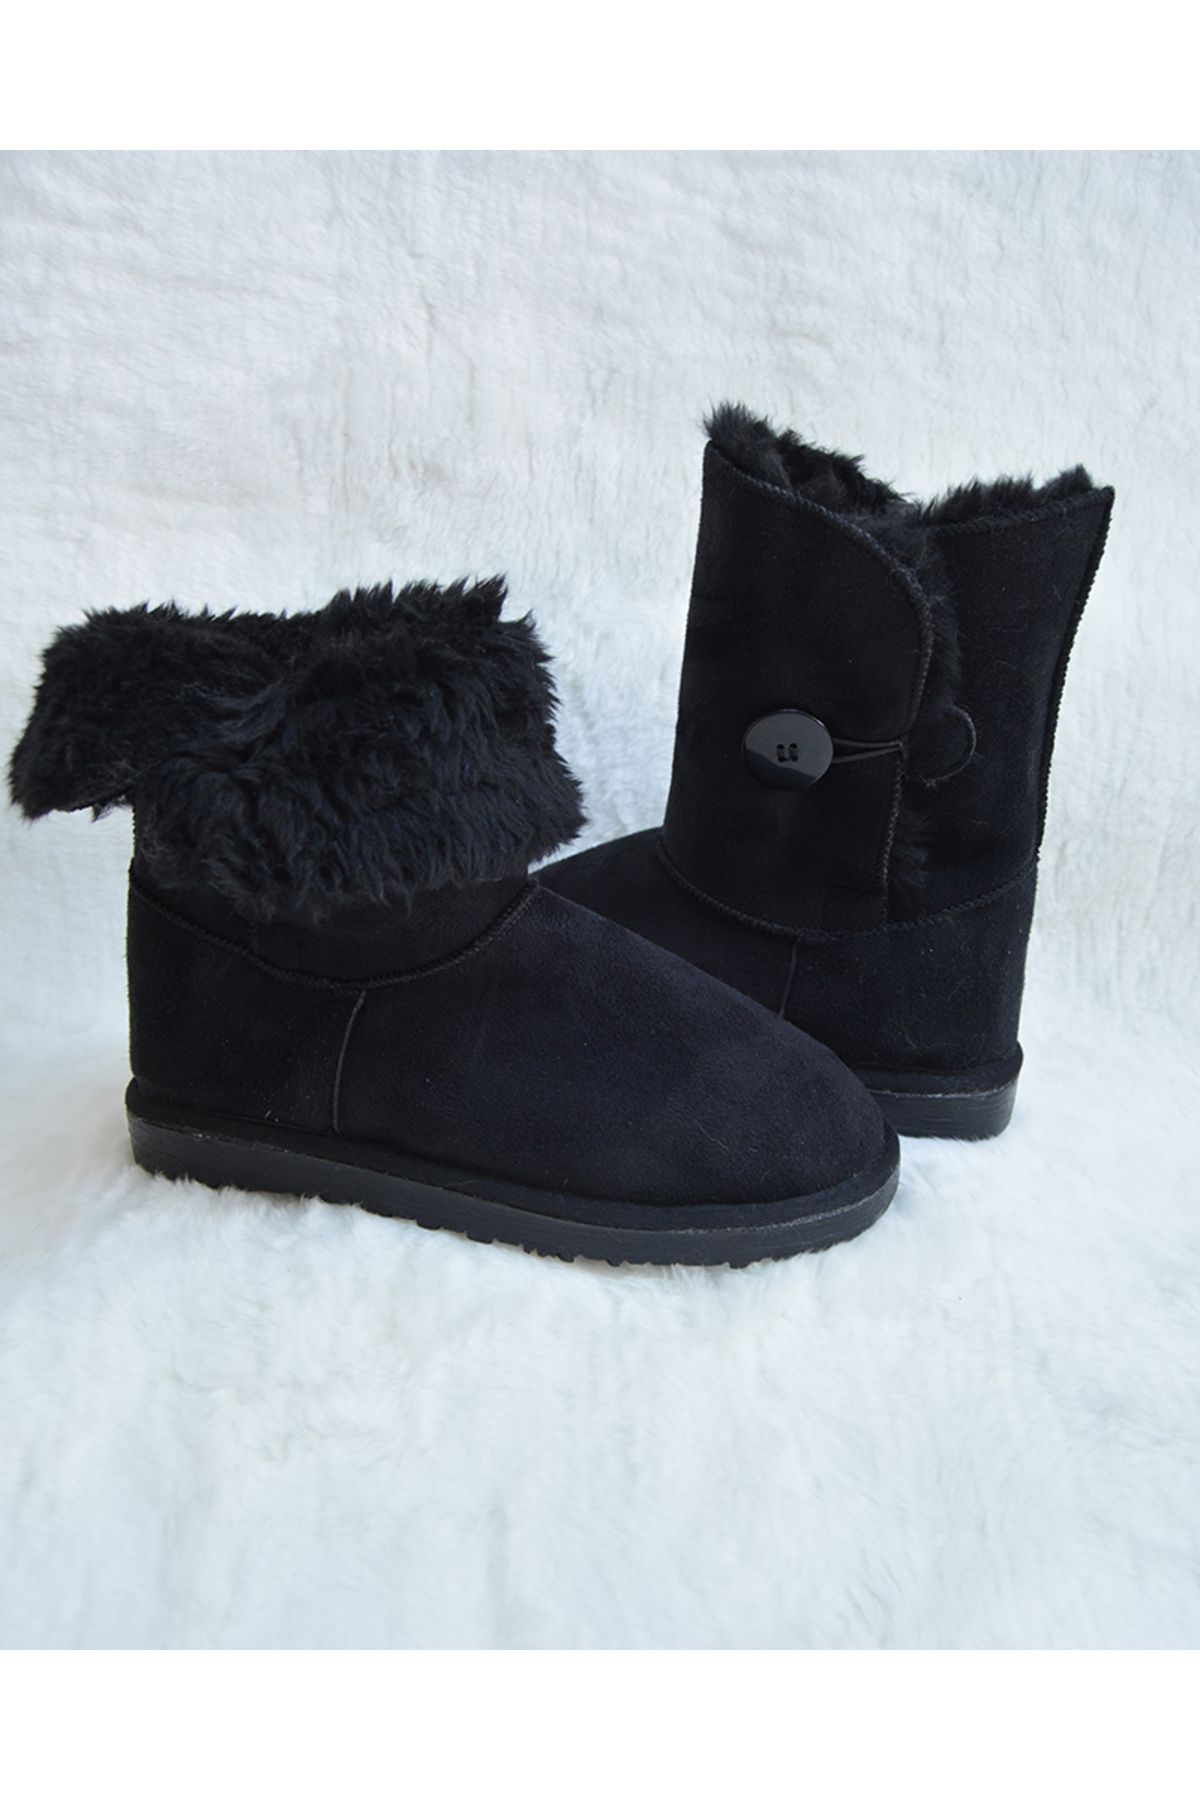 M Miel Women's Single Button Suede Boots with Fur Inside Winter Boots ...